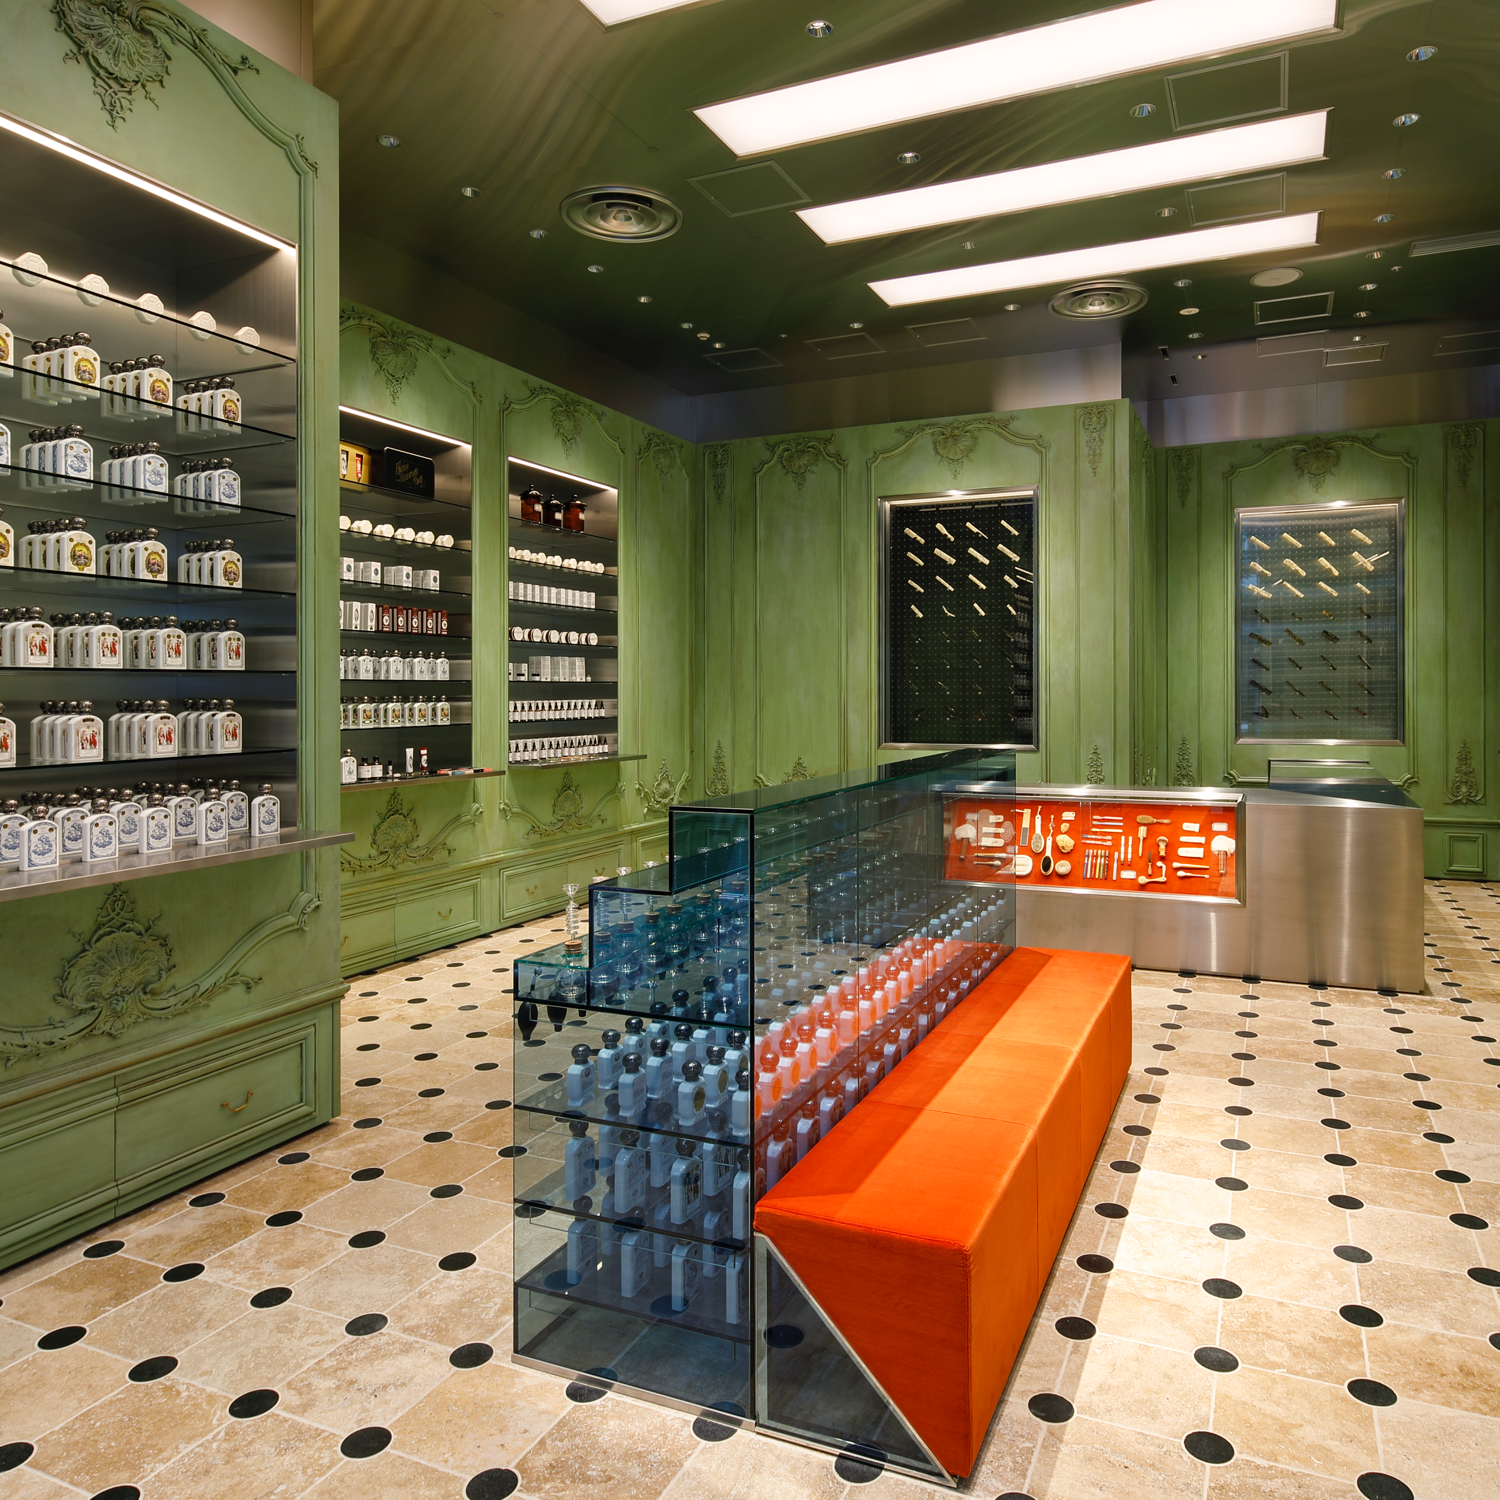 Tokyo: Officine Universelle Buly shop-in-shop opening